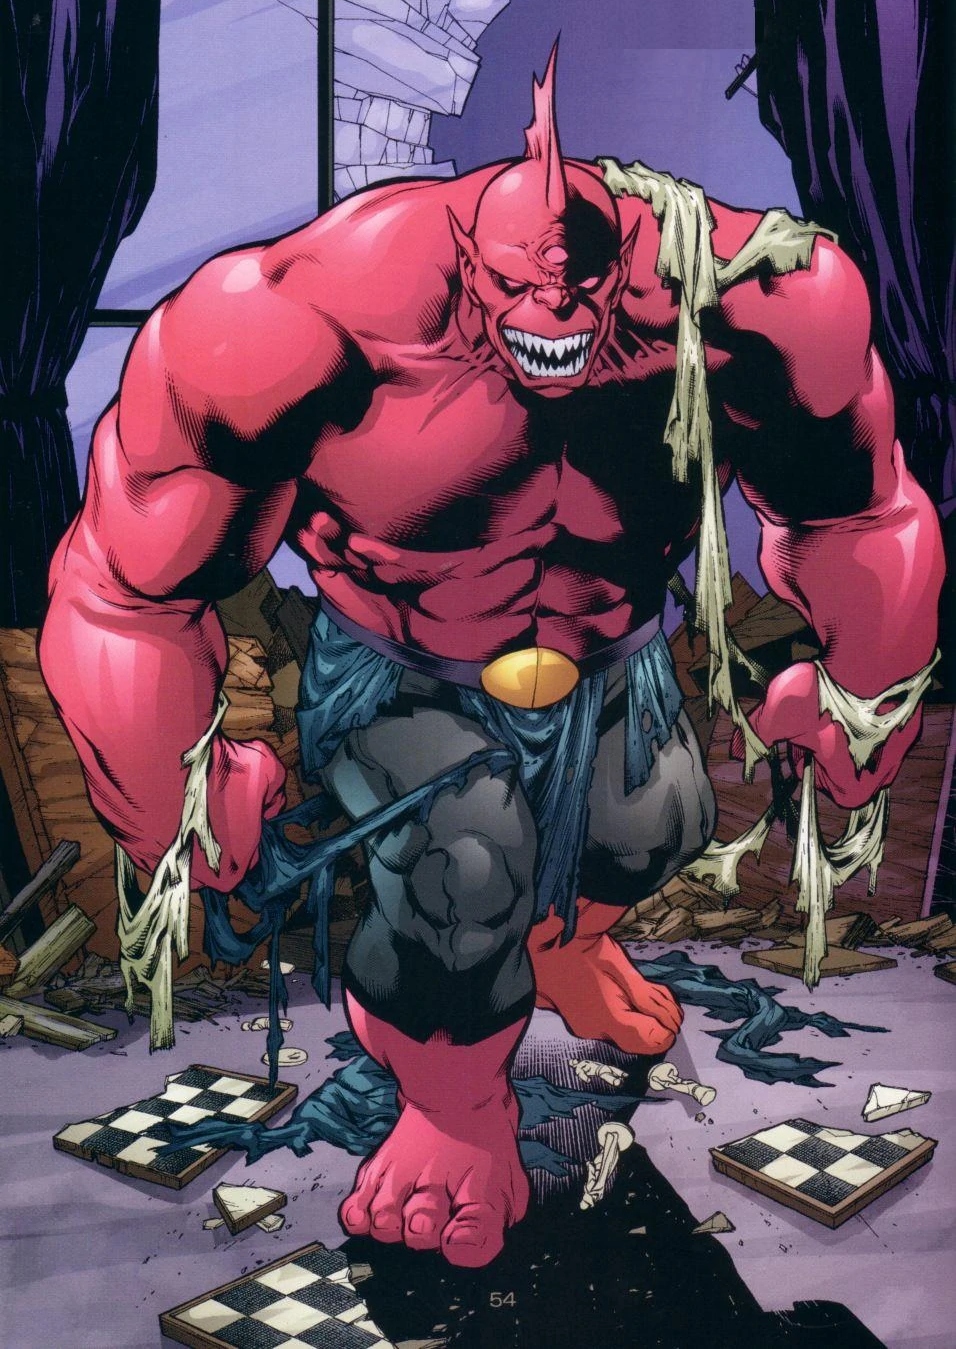 Despero in some other storylines